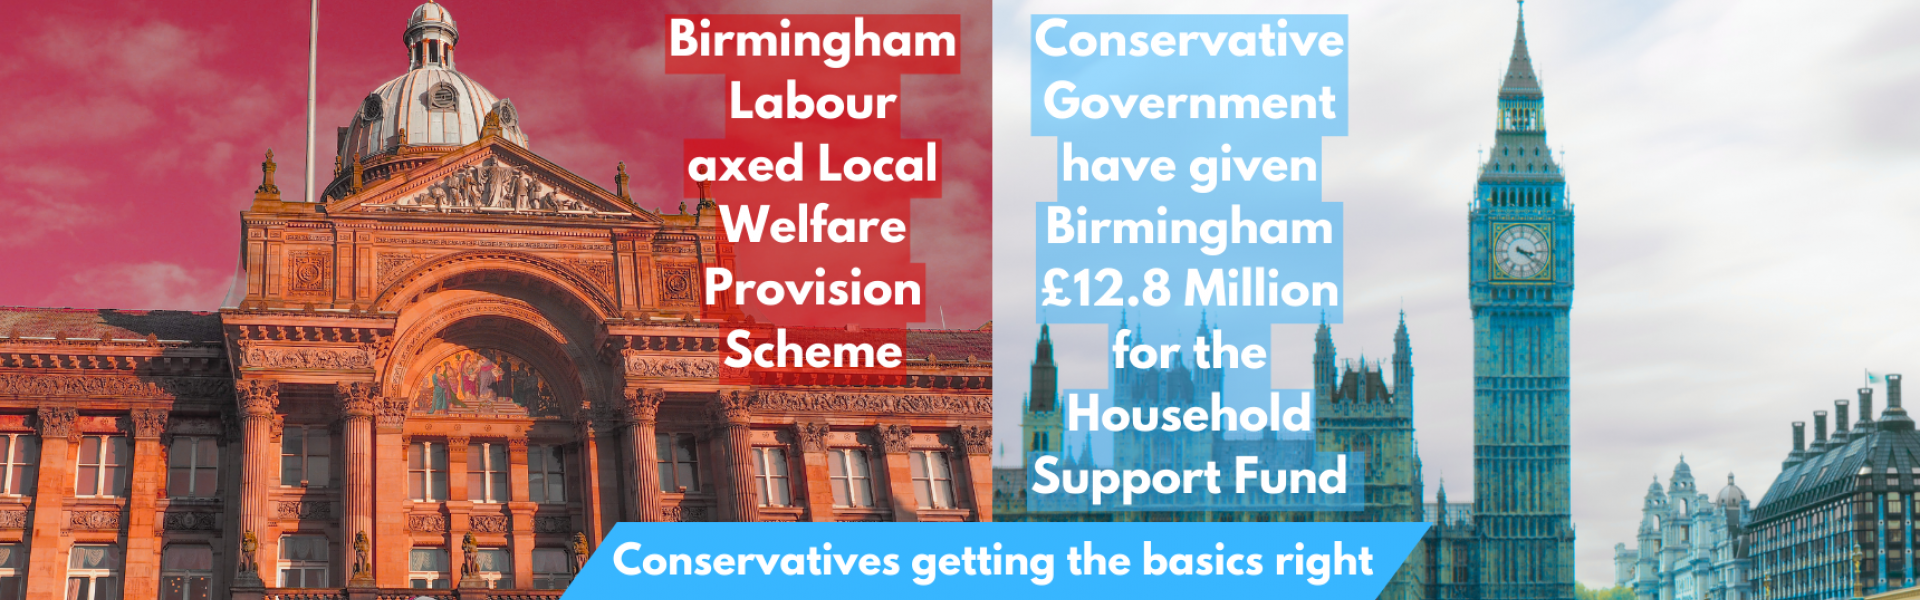 Birmingham Labour scrapped Birmingham City Council's Welfare Provision Scheme while the Conservative Government funded the Household support fund by £12.8million